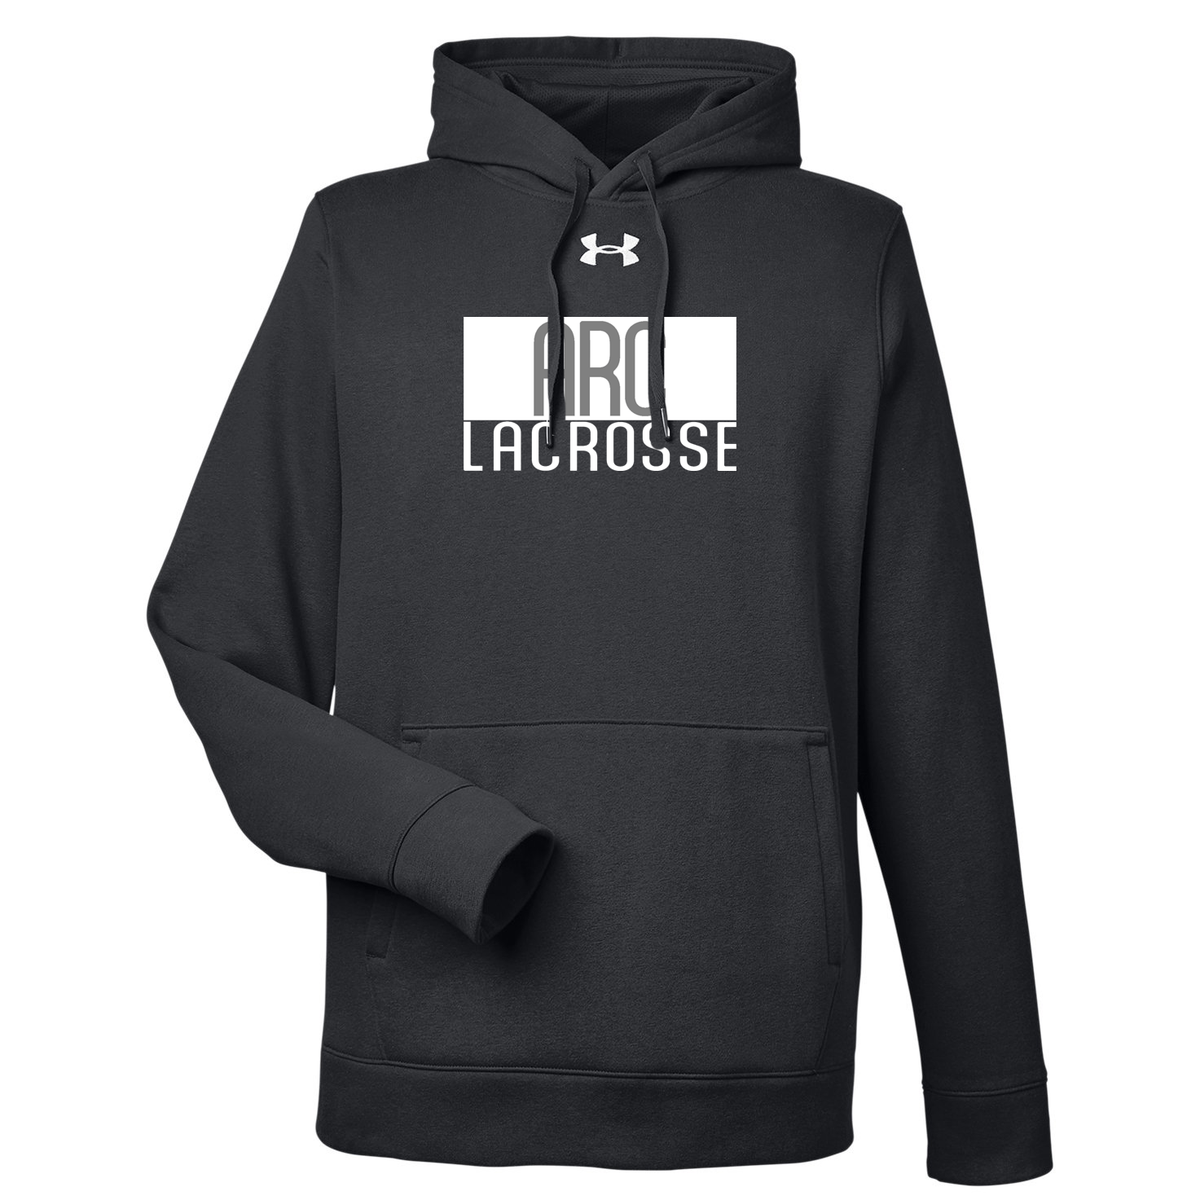 Arc Lacrosse Club Under Armour Hustle Pullover Hooded Sweatshirt *Highly Suggested for Team Travel & Games*